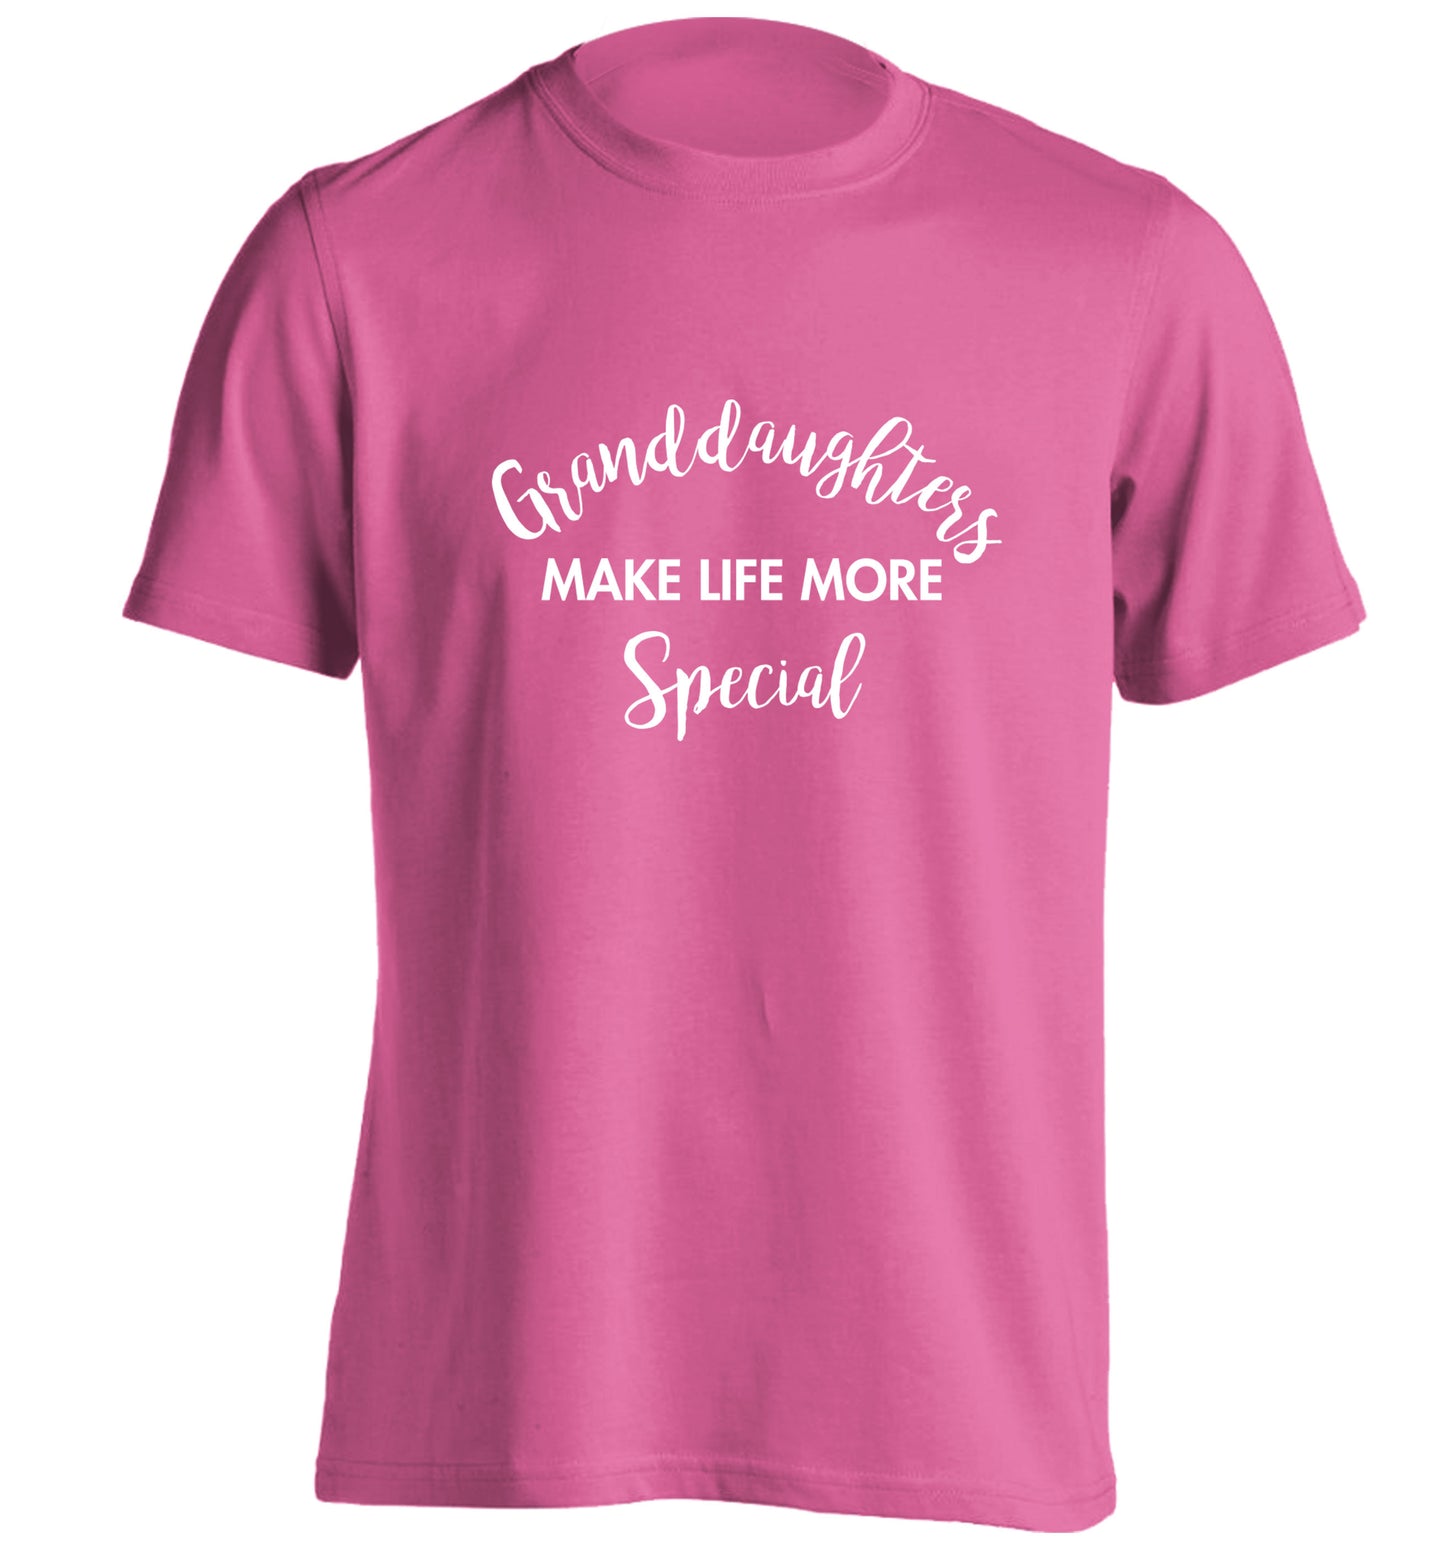 Granddaughters make life more special adults unisex pink Tshirt 2XL